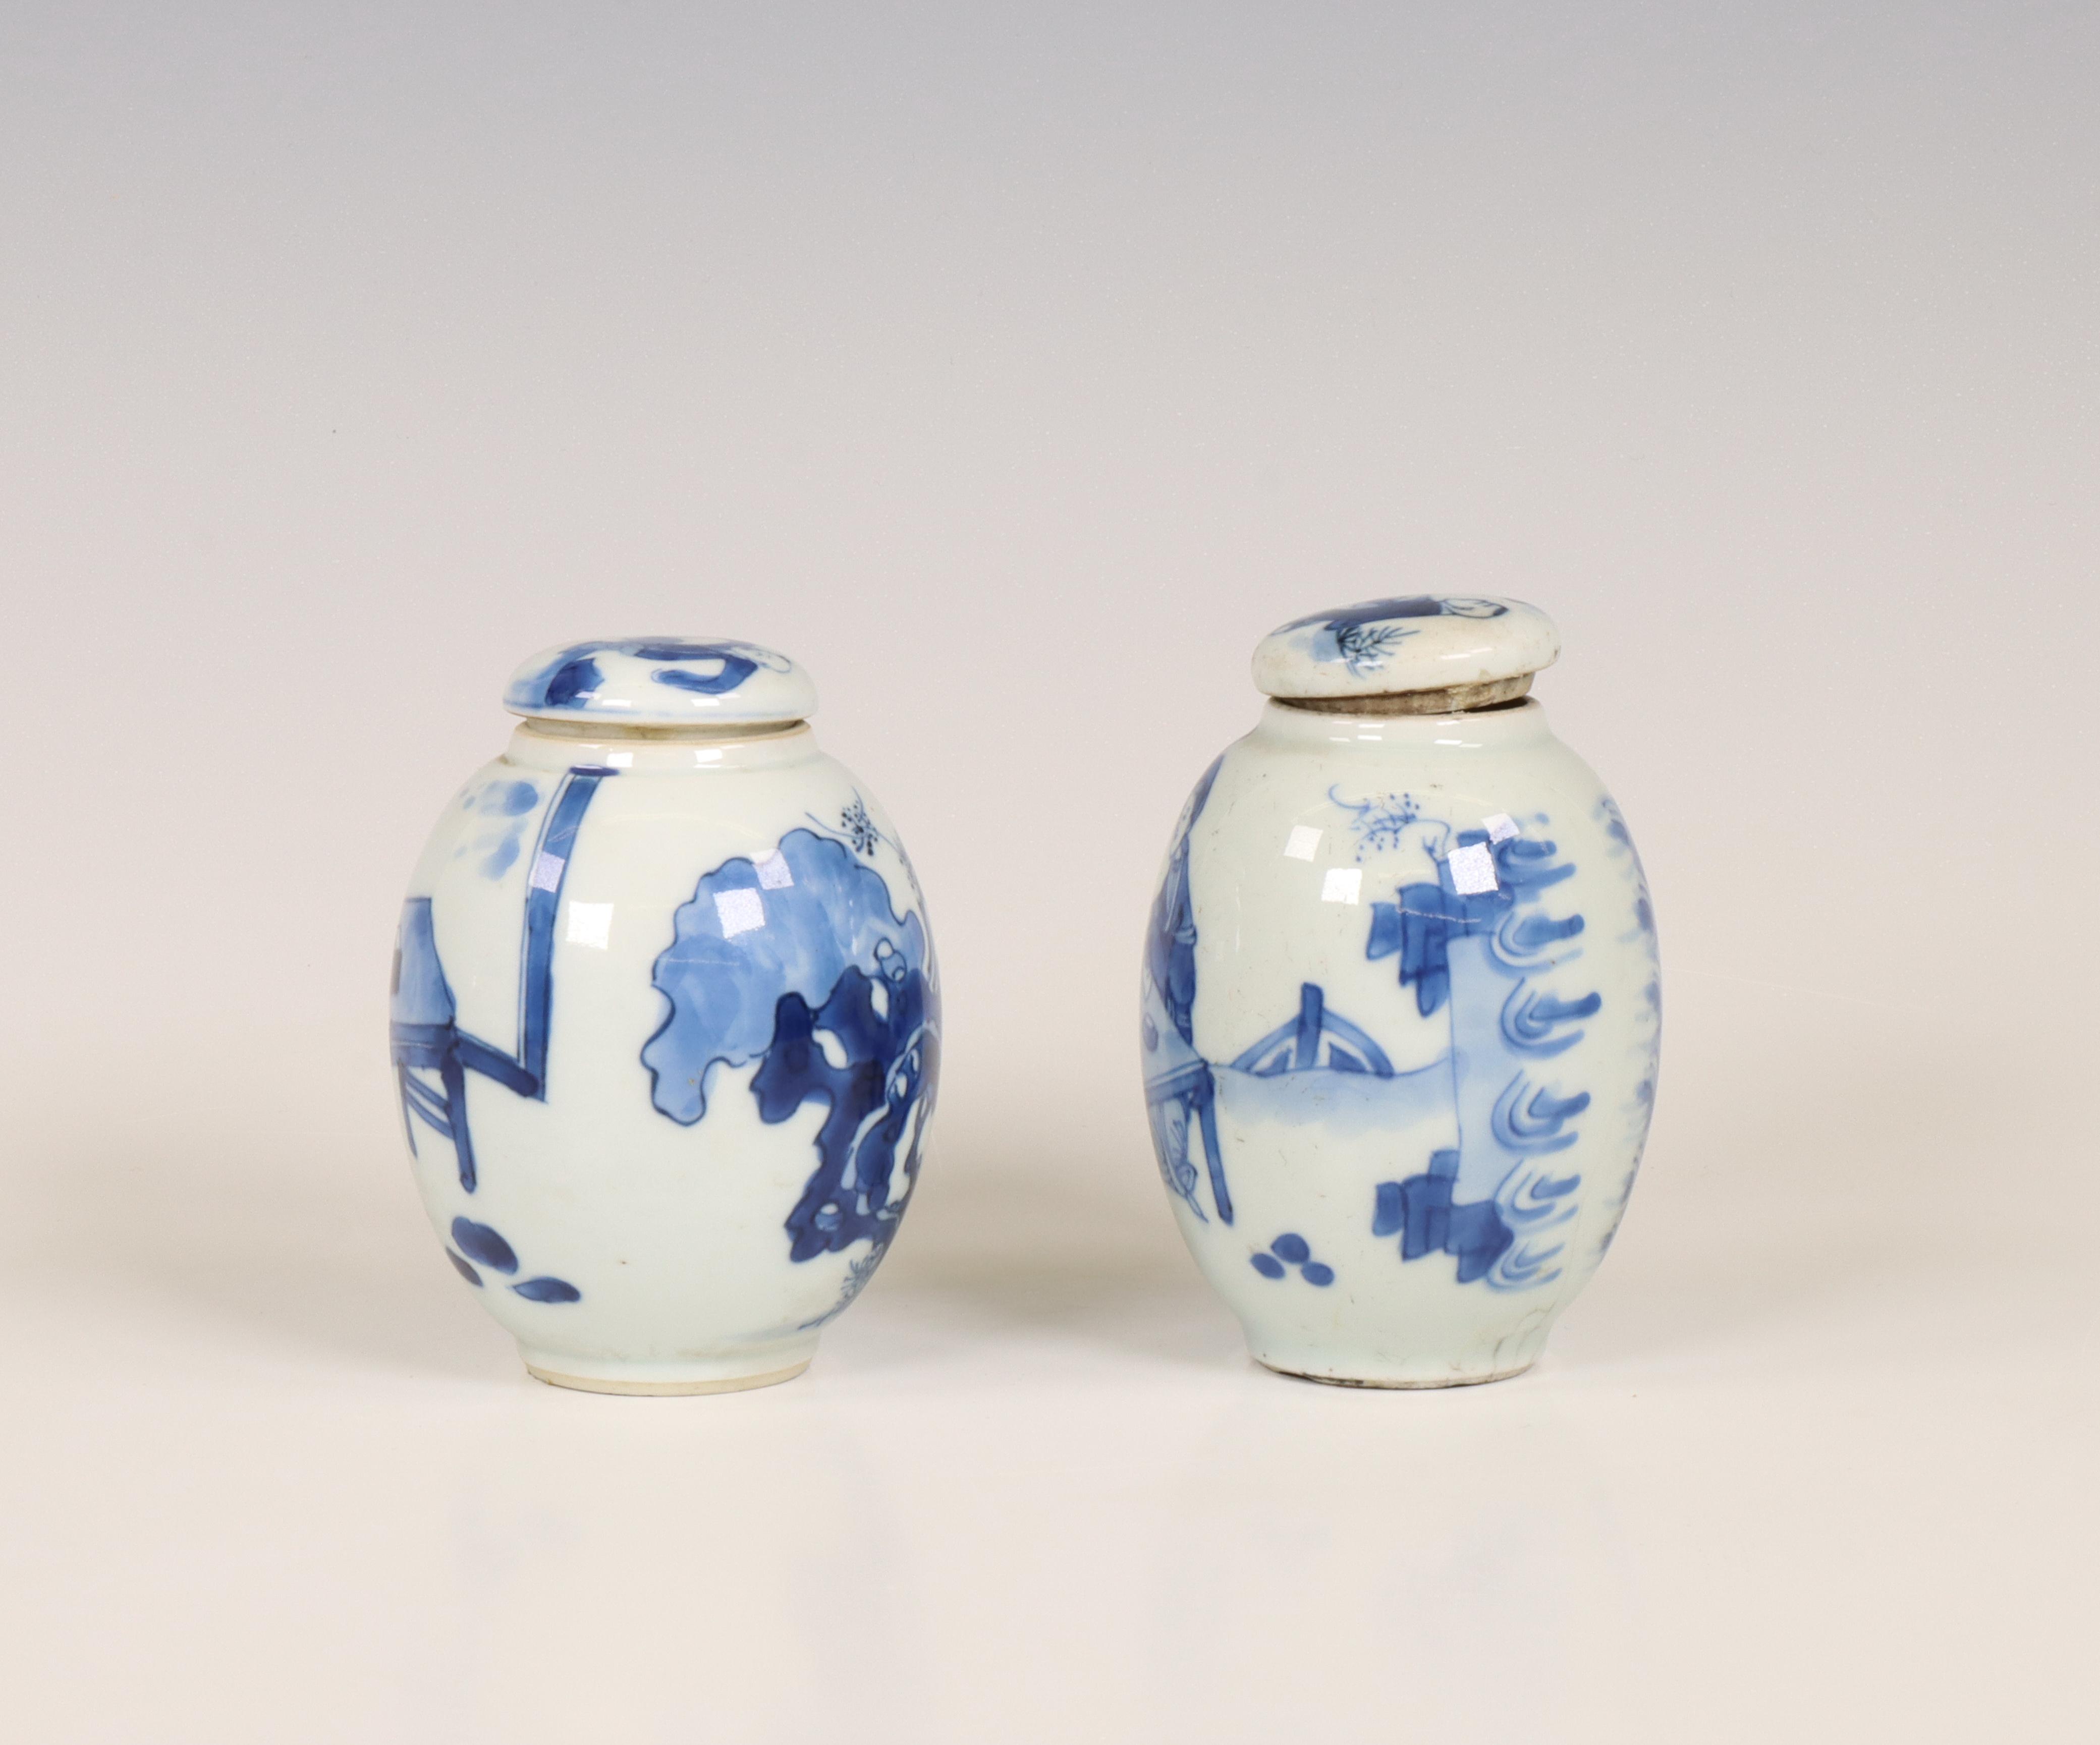 China, two blue and white porcelain tea-caddies and covers, Kangxi period (1662-1722), - Image 5 of 5